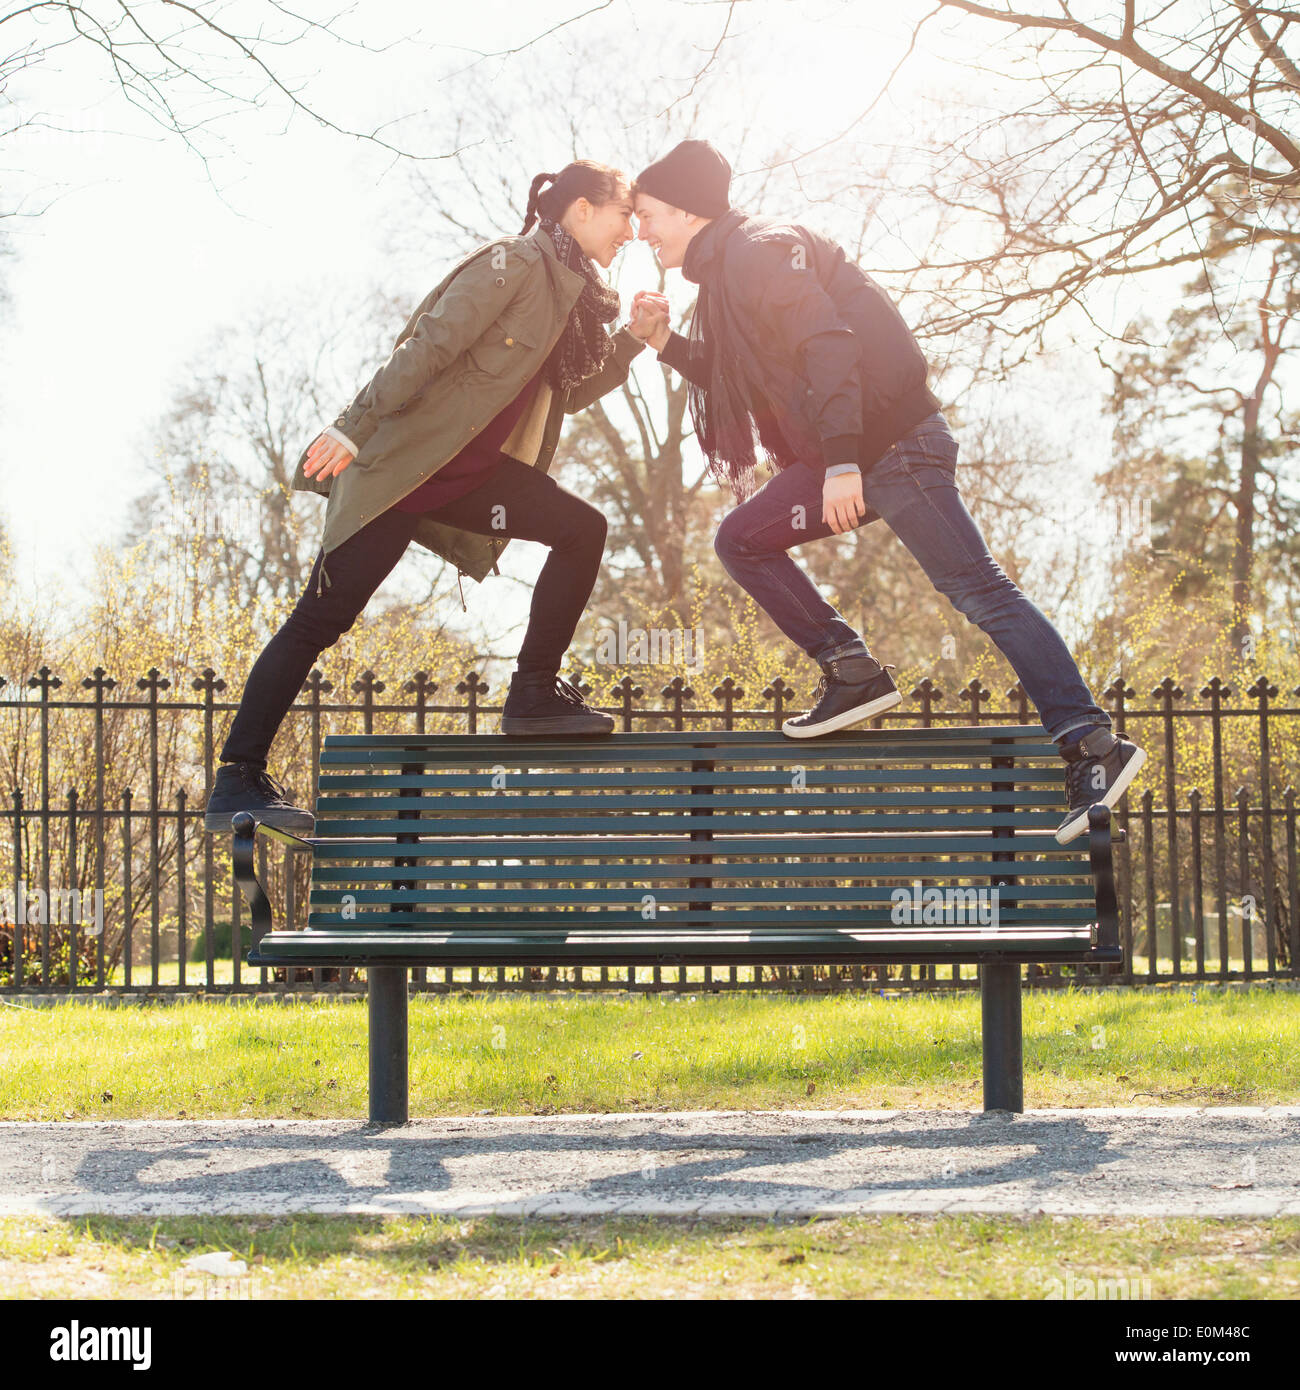 Dating young couple standing on park bench, se tenant la main. Banque D'Images